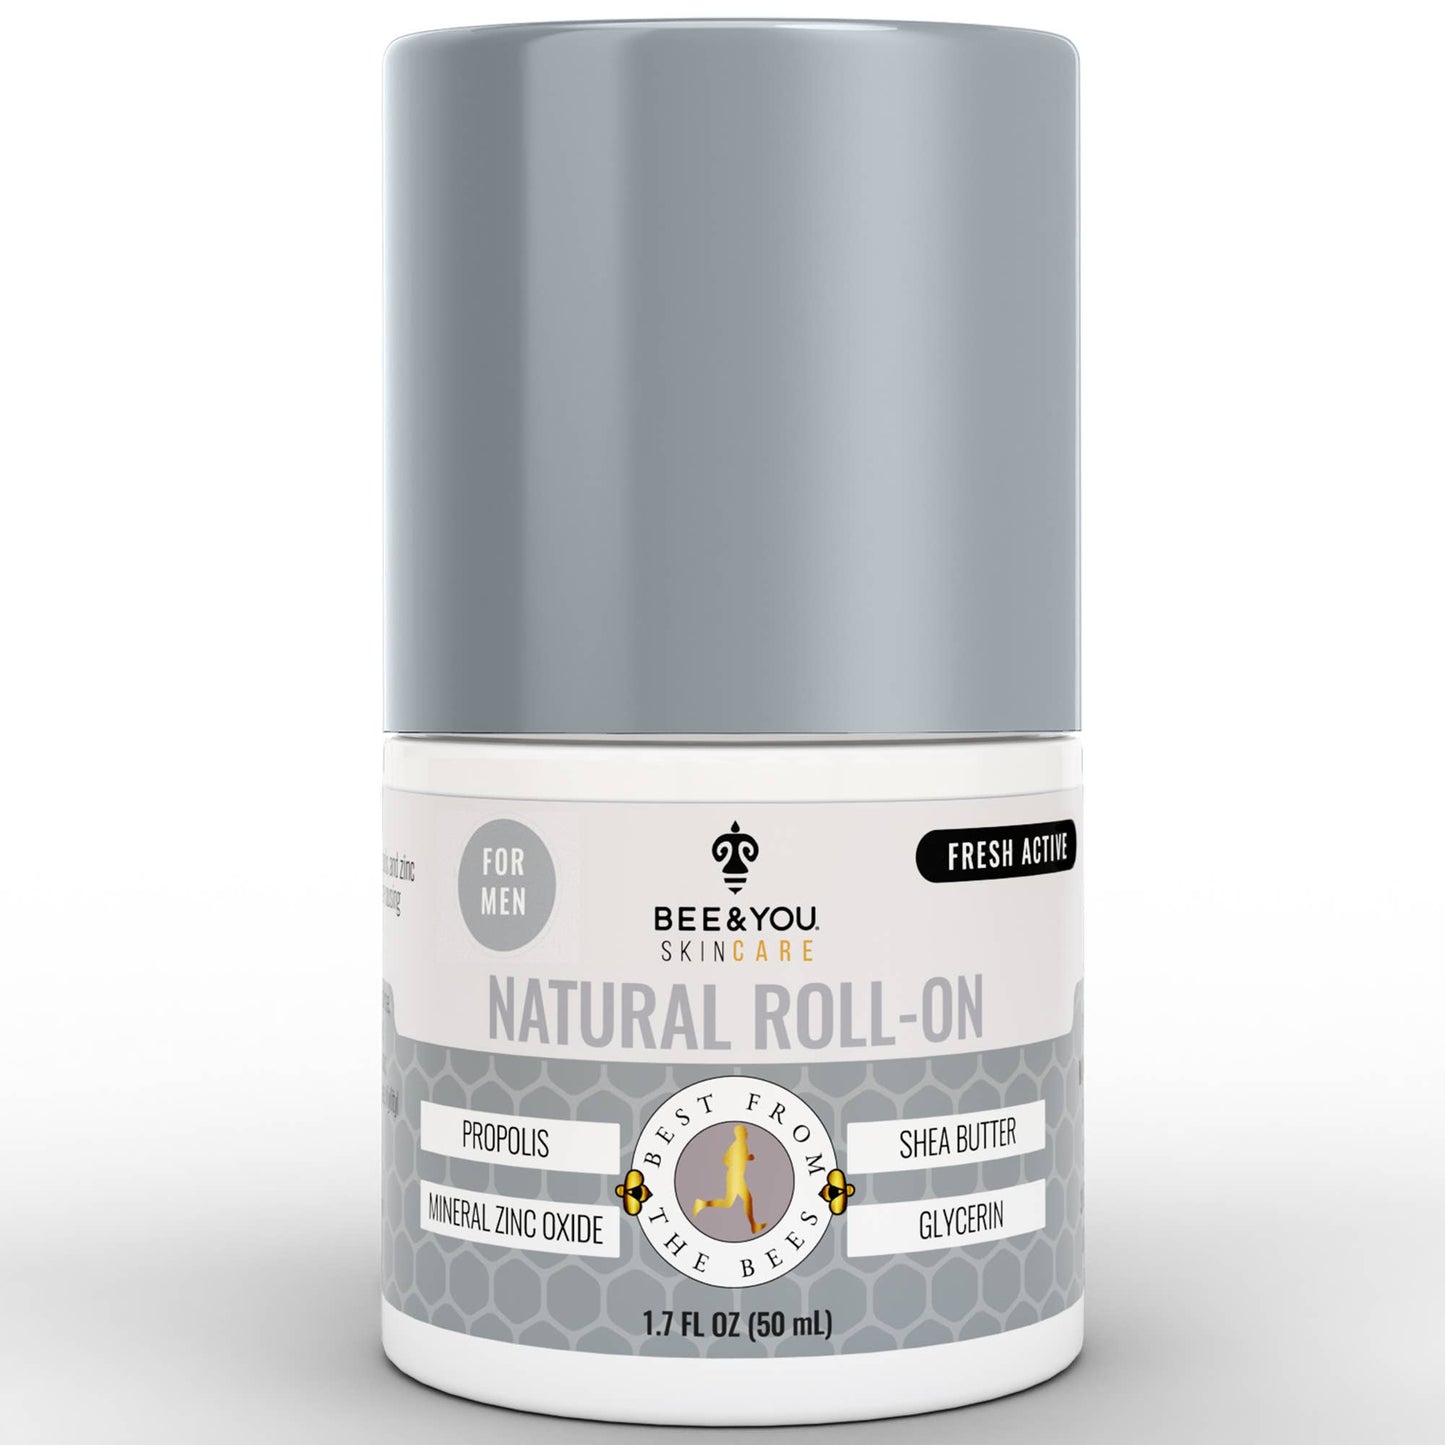 Natural Roll-on Deodorant for Men